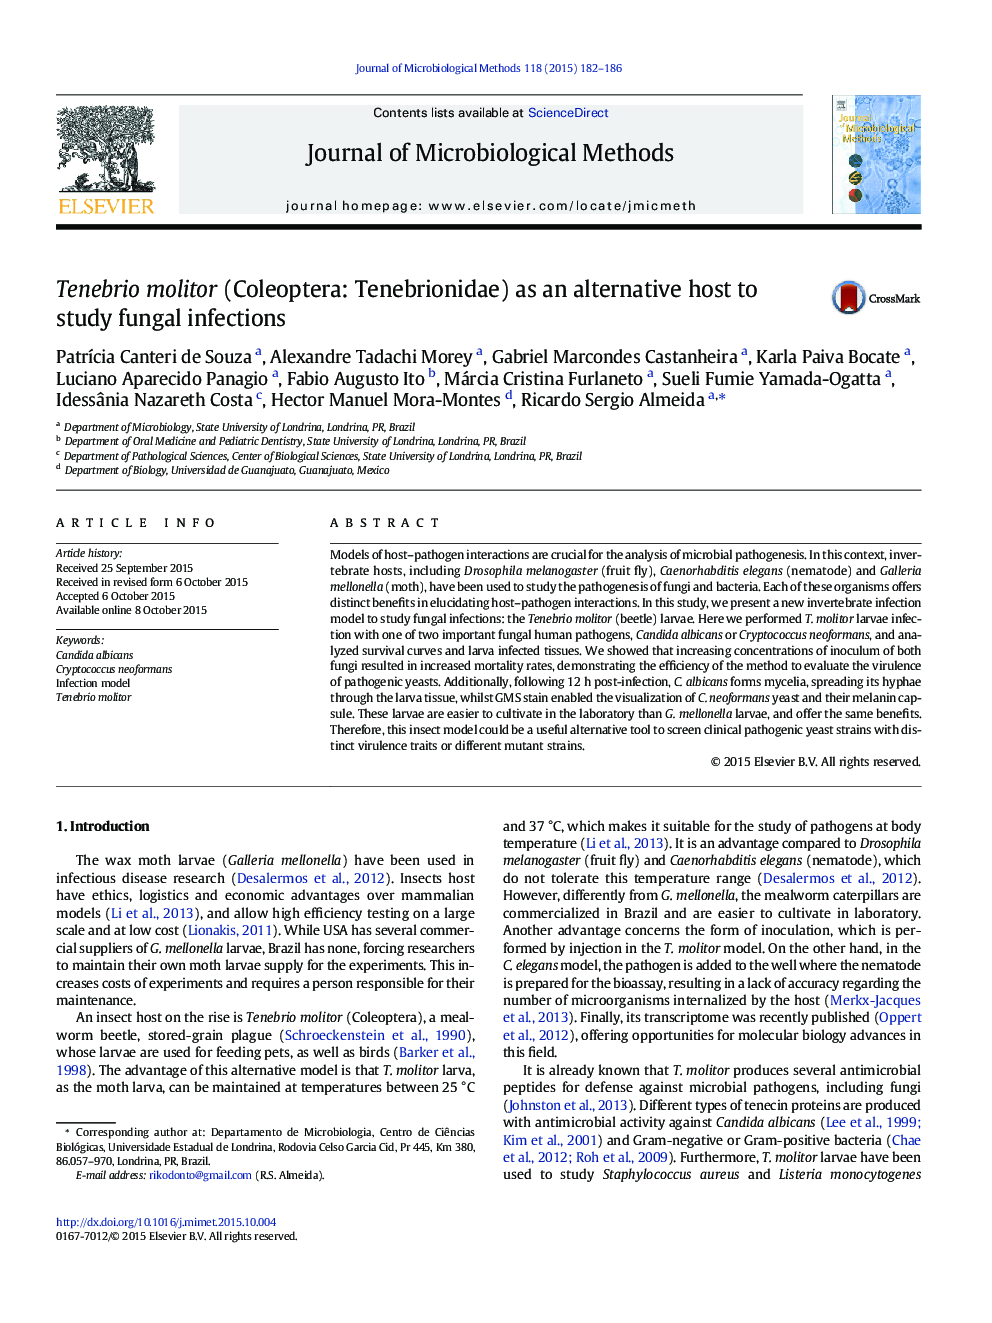 Tenebrio molitor (Coleoptera: Tenebrionidae) as an alternative host to study fungal infections